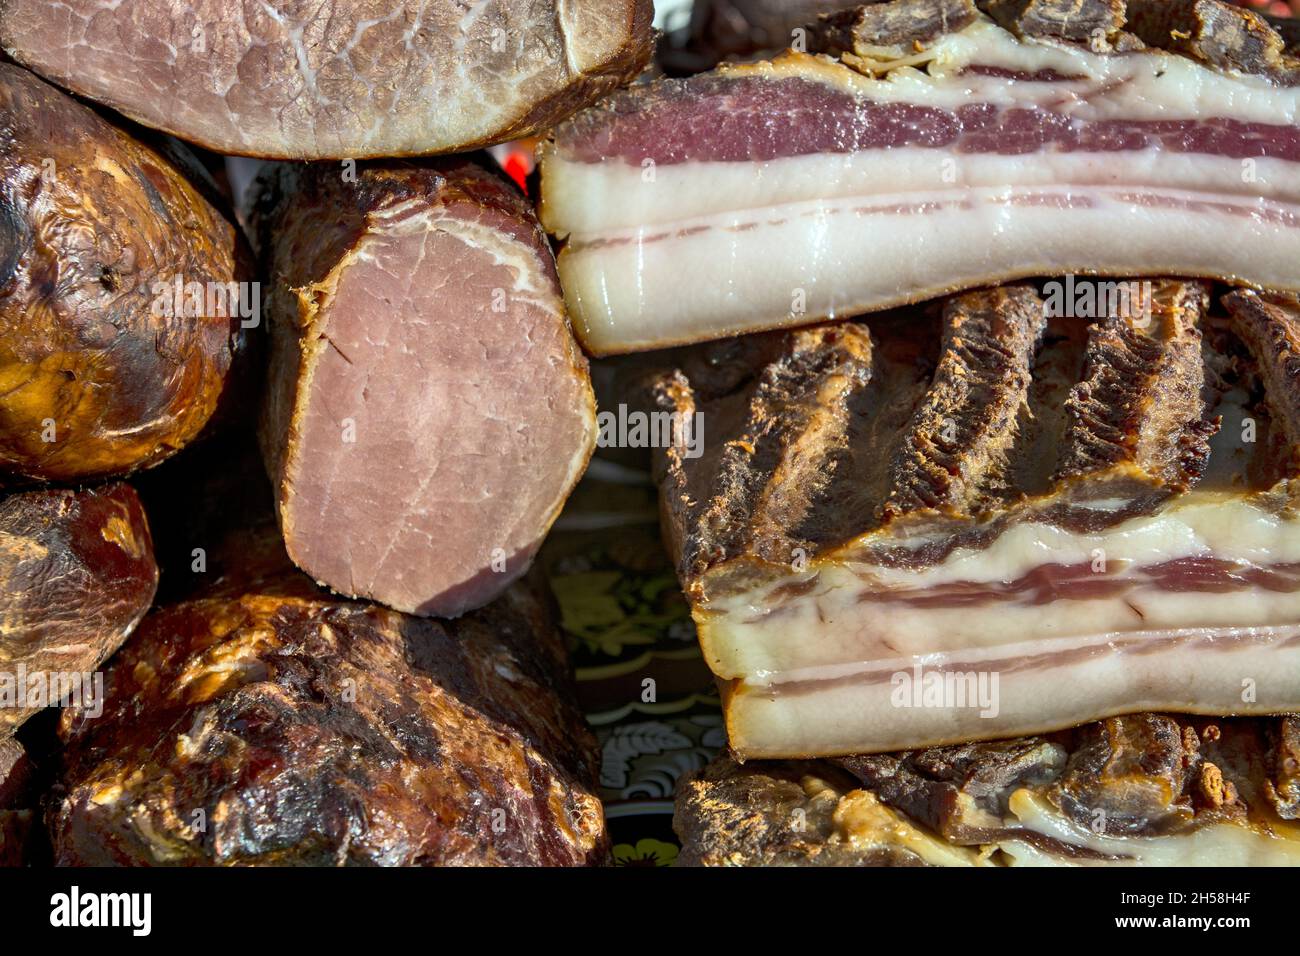 Exposed bacon and dried meat products. The products are domestic and are presented for sale. Stock Photo